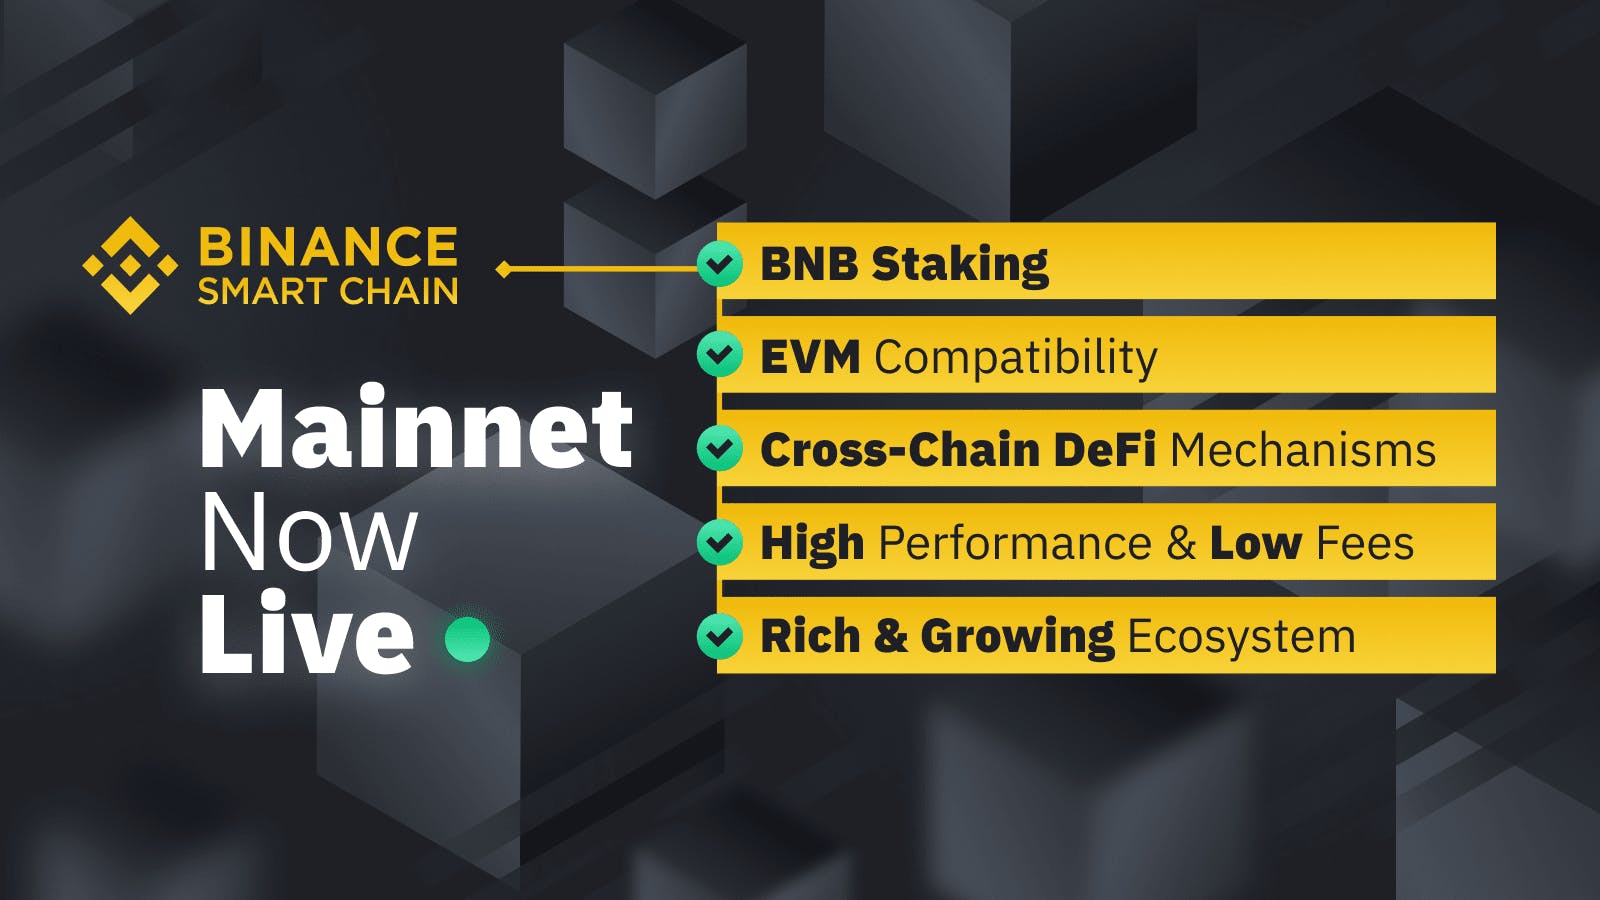 Advantages of the Binance Smart Chain